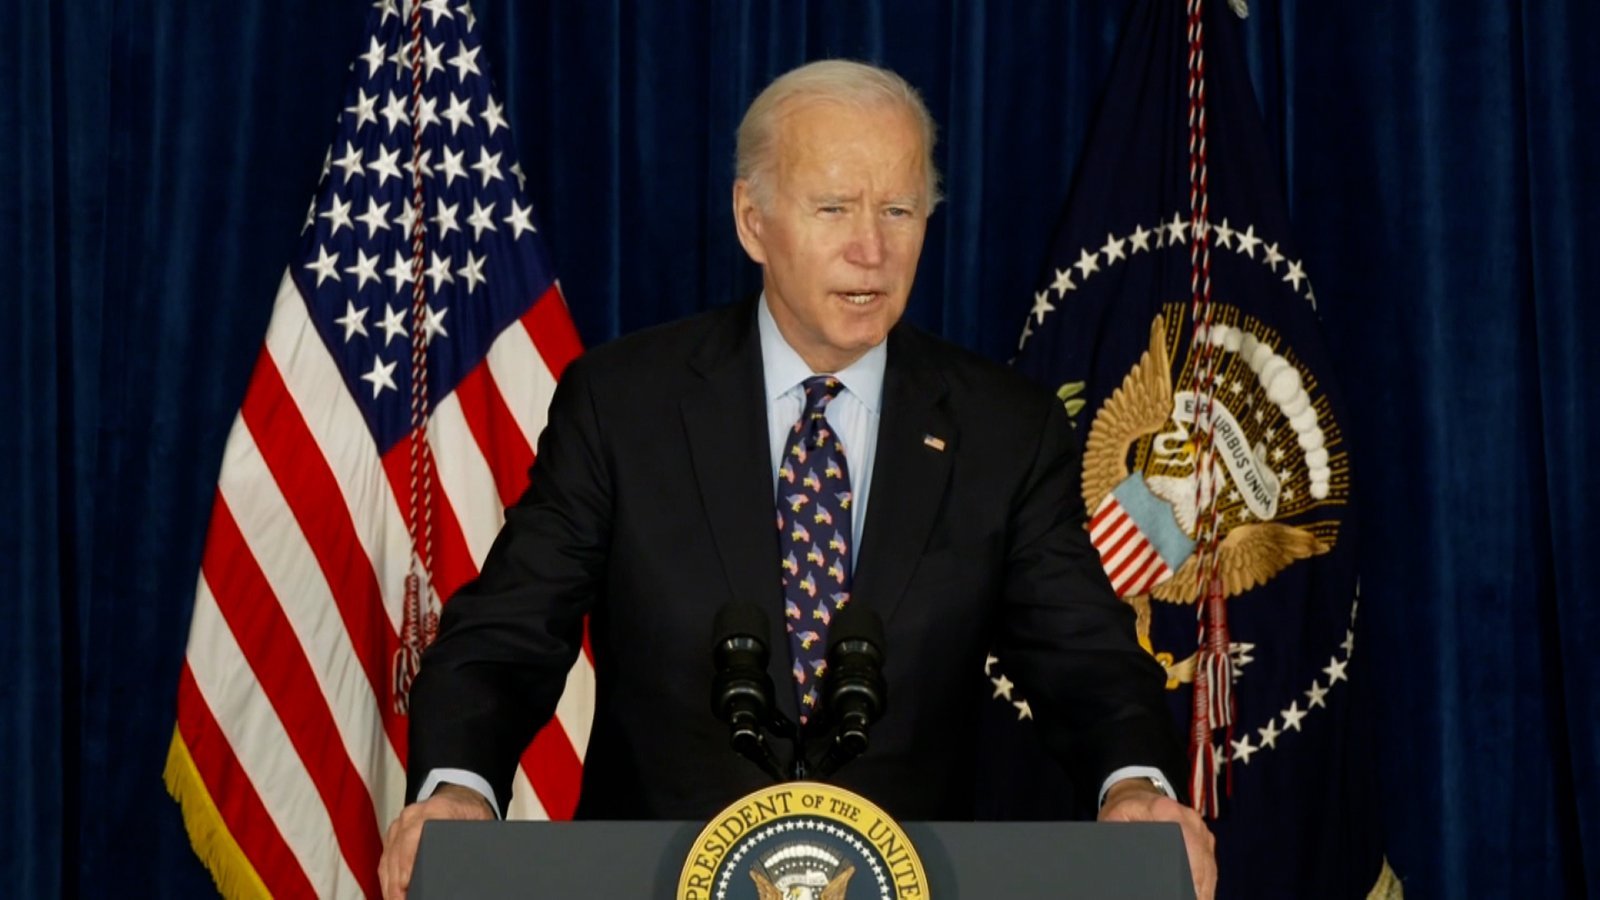 US President Joe Biden shared words of support Saturday afternoon to the states responding to the devastation following the storms.